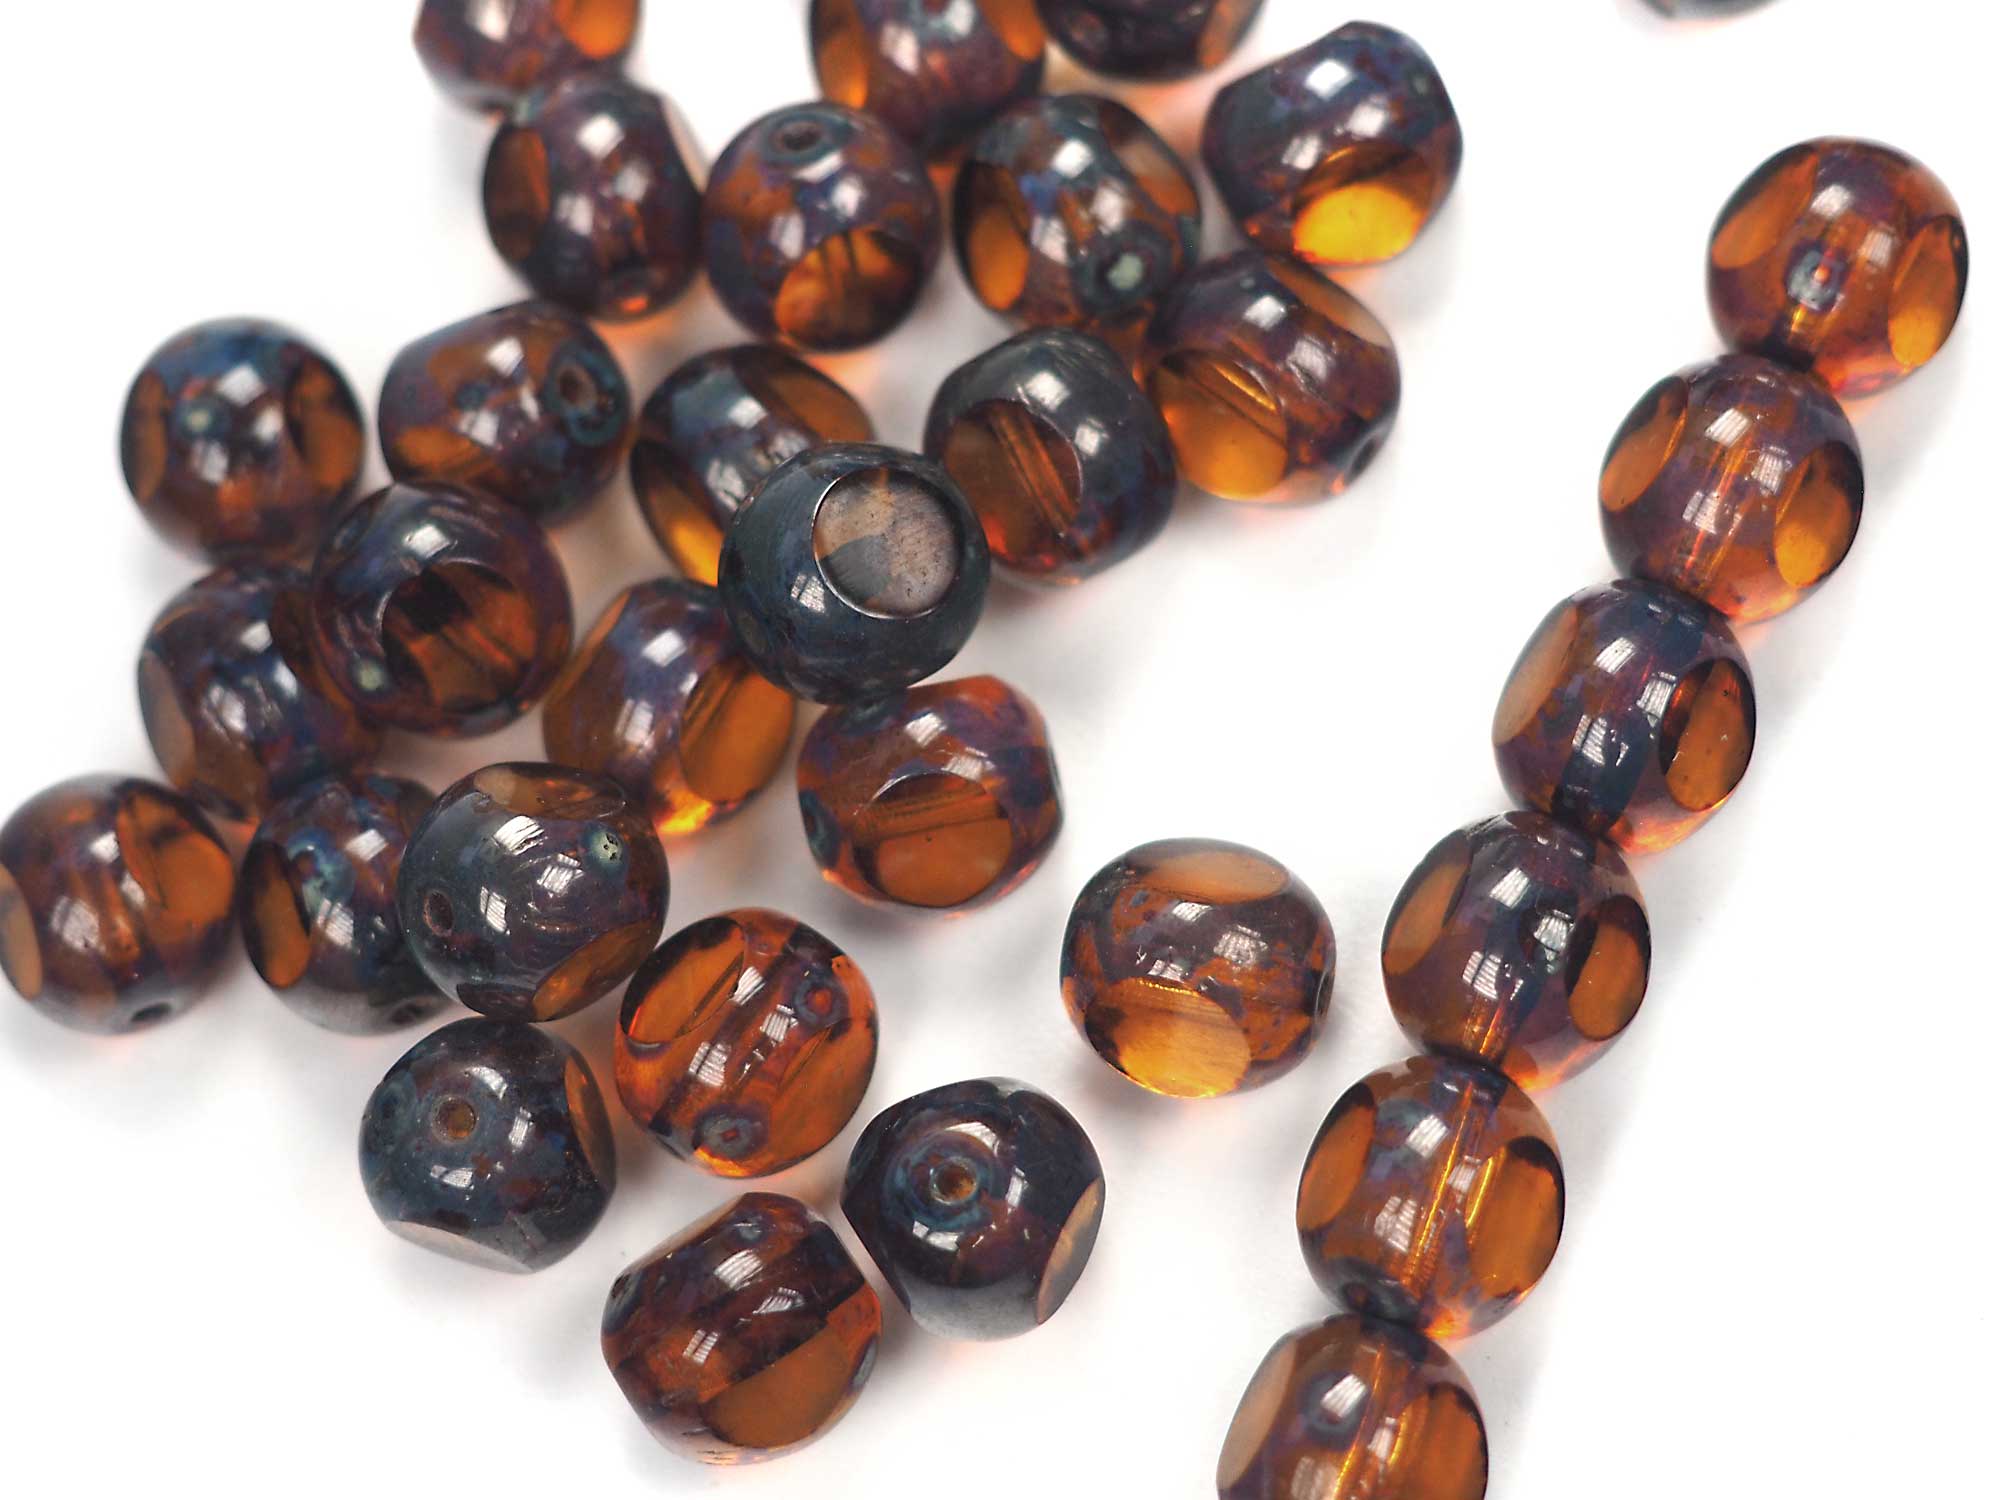 Czech Glass 3-Cut Round Window Beads (Soccer Ball Bead) Art. 151-19501 in size 10mm, Light Brown Picasso coating, 24pcs, P883